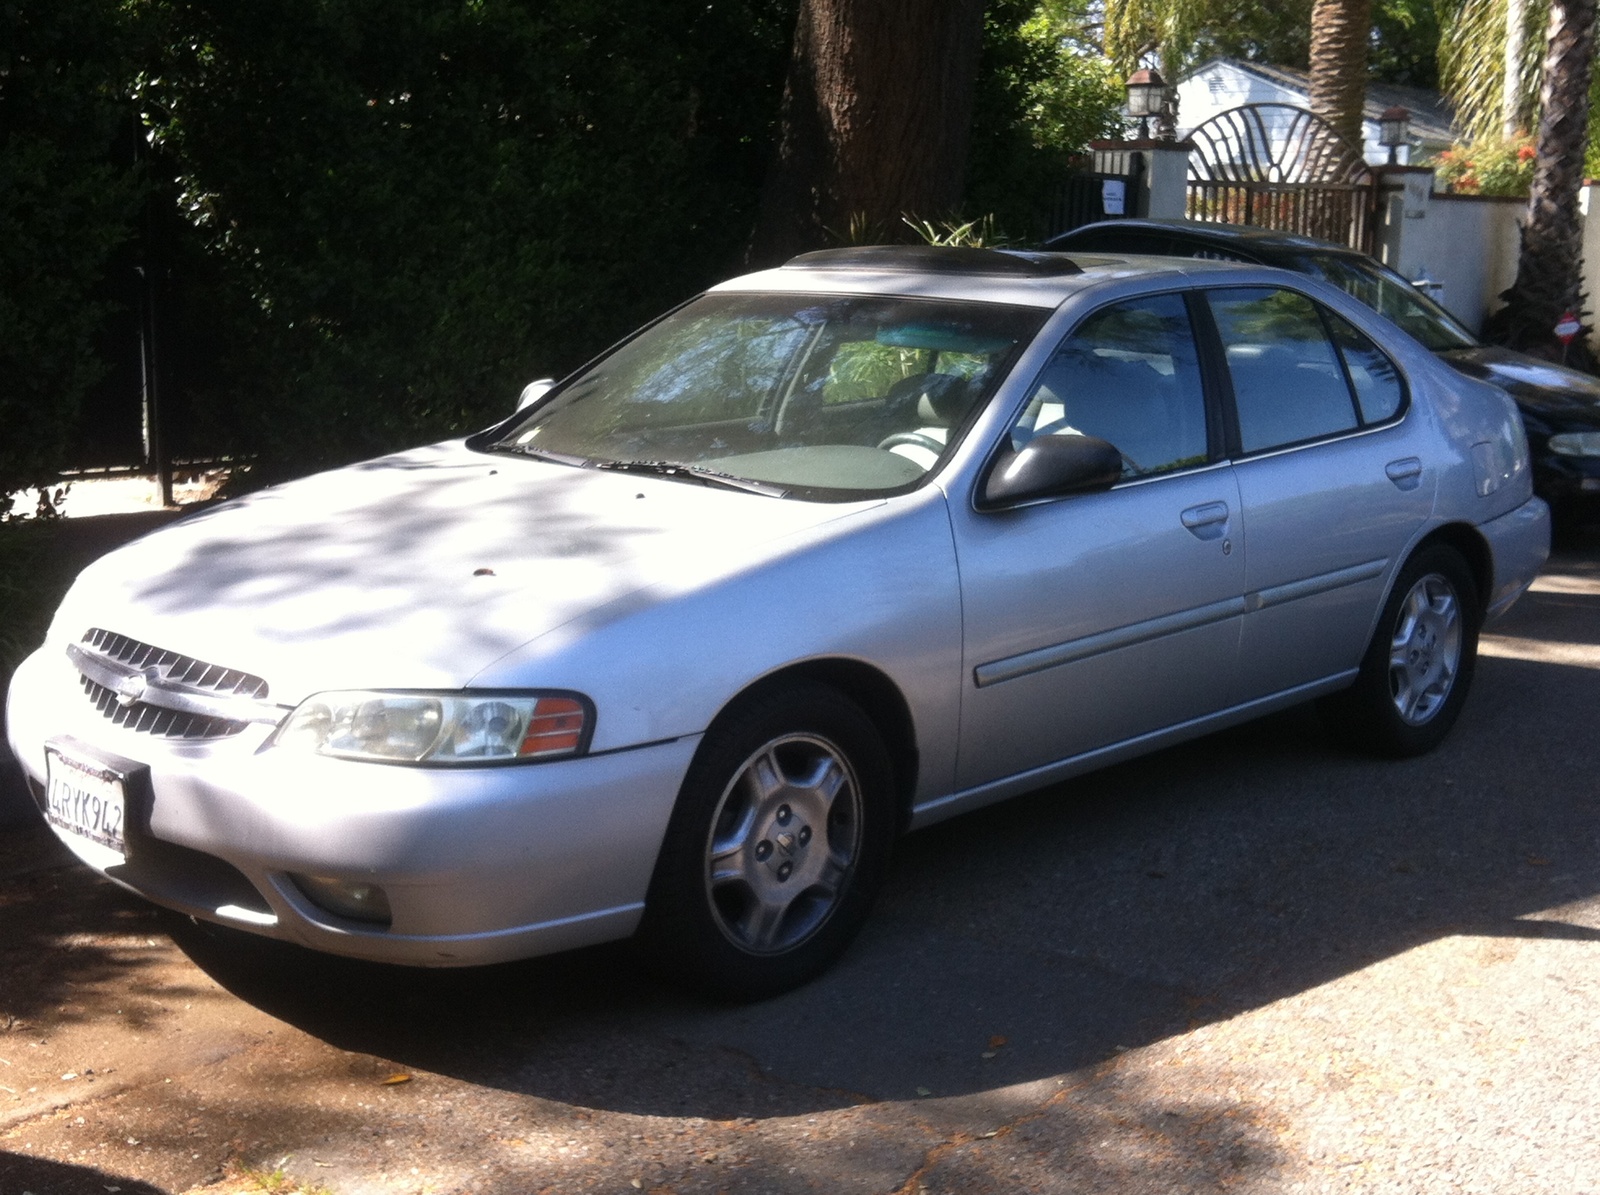 2001 Nissan altima gle review #4